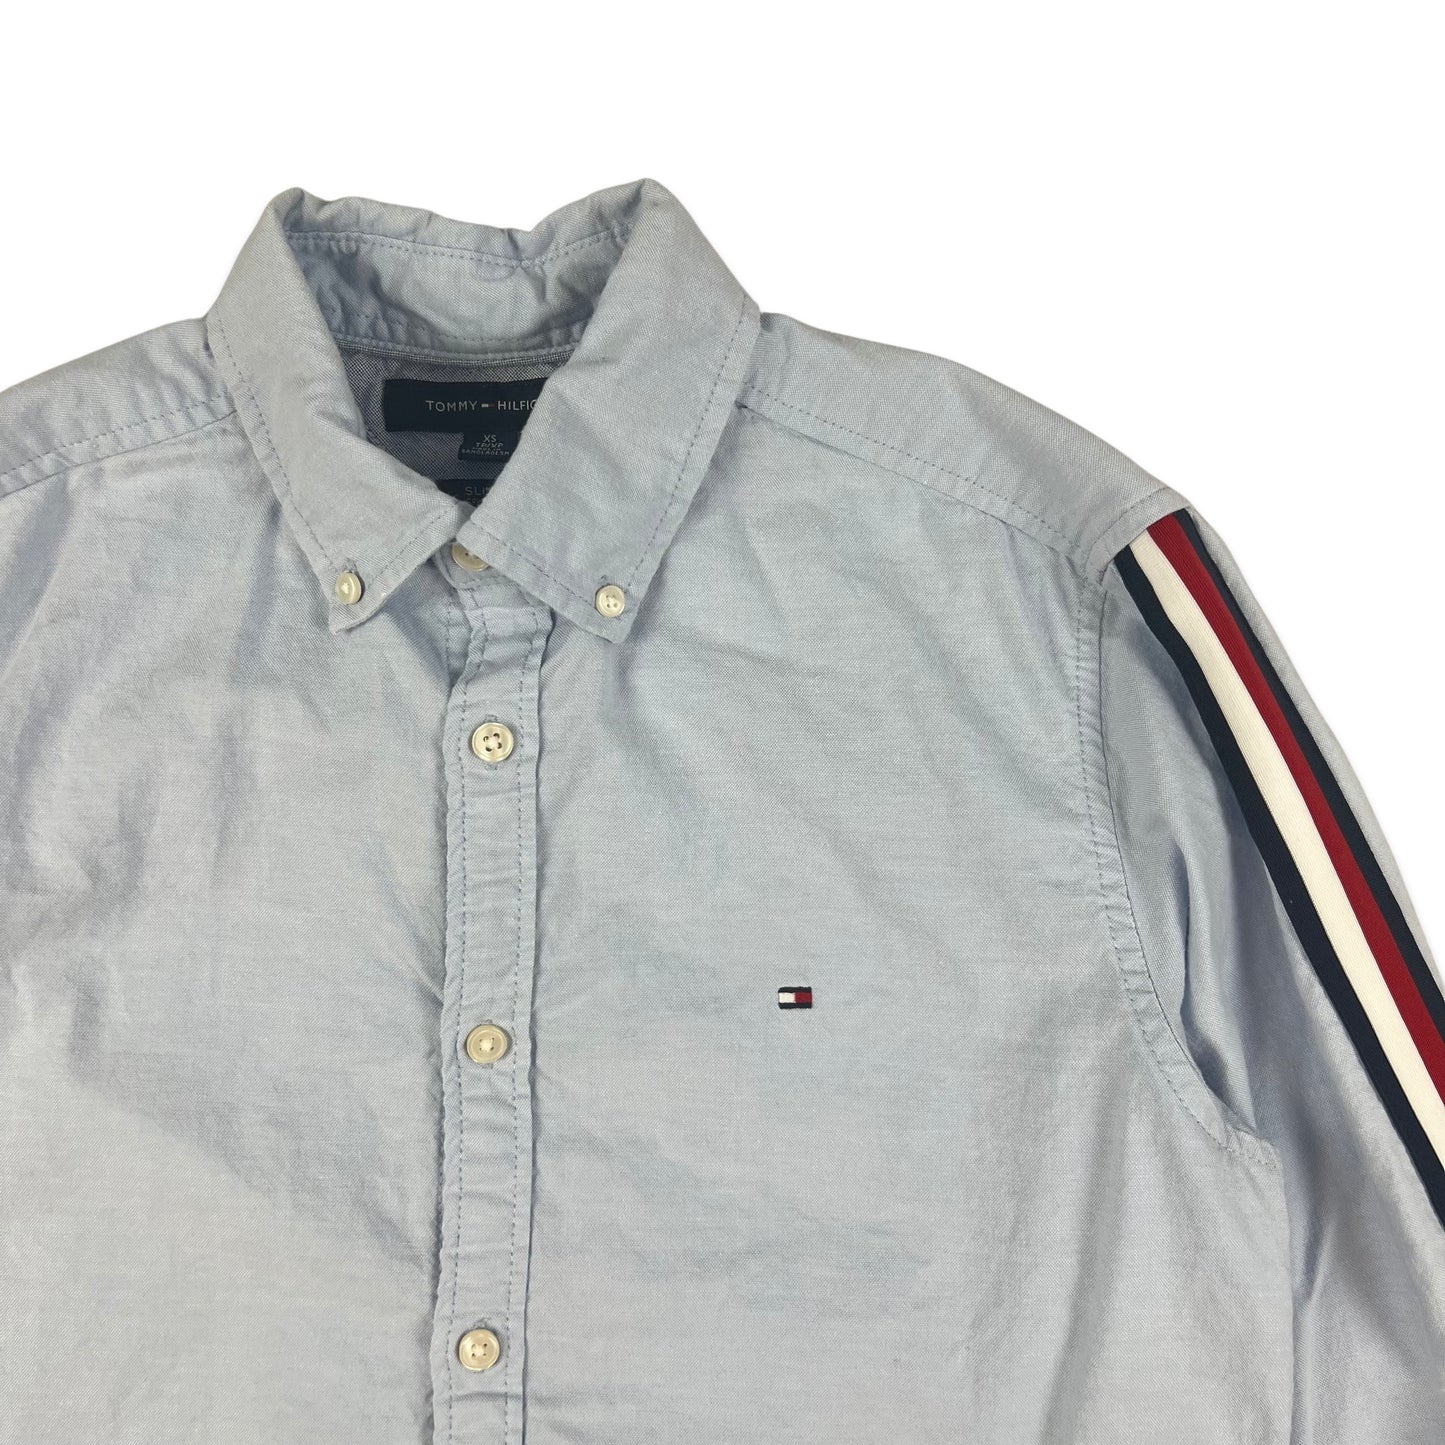 00s Vintage White Tommy Hilfiger Shirt Blue Red White XS S